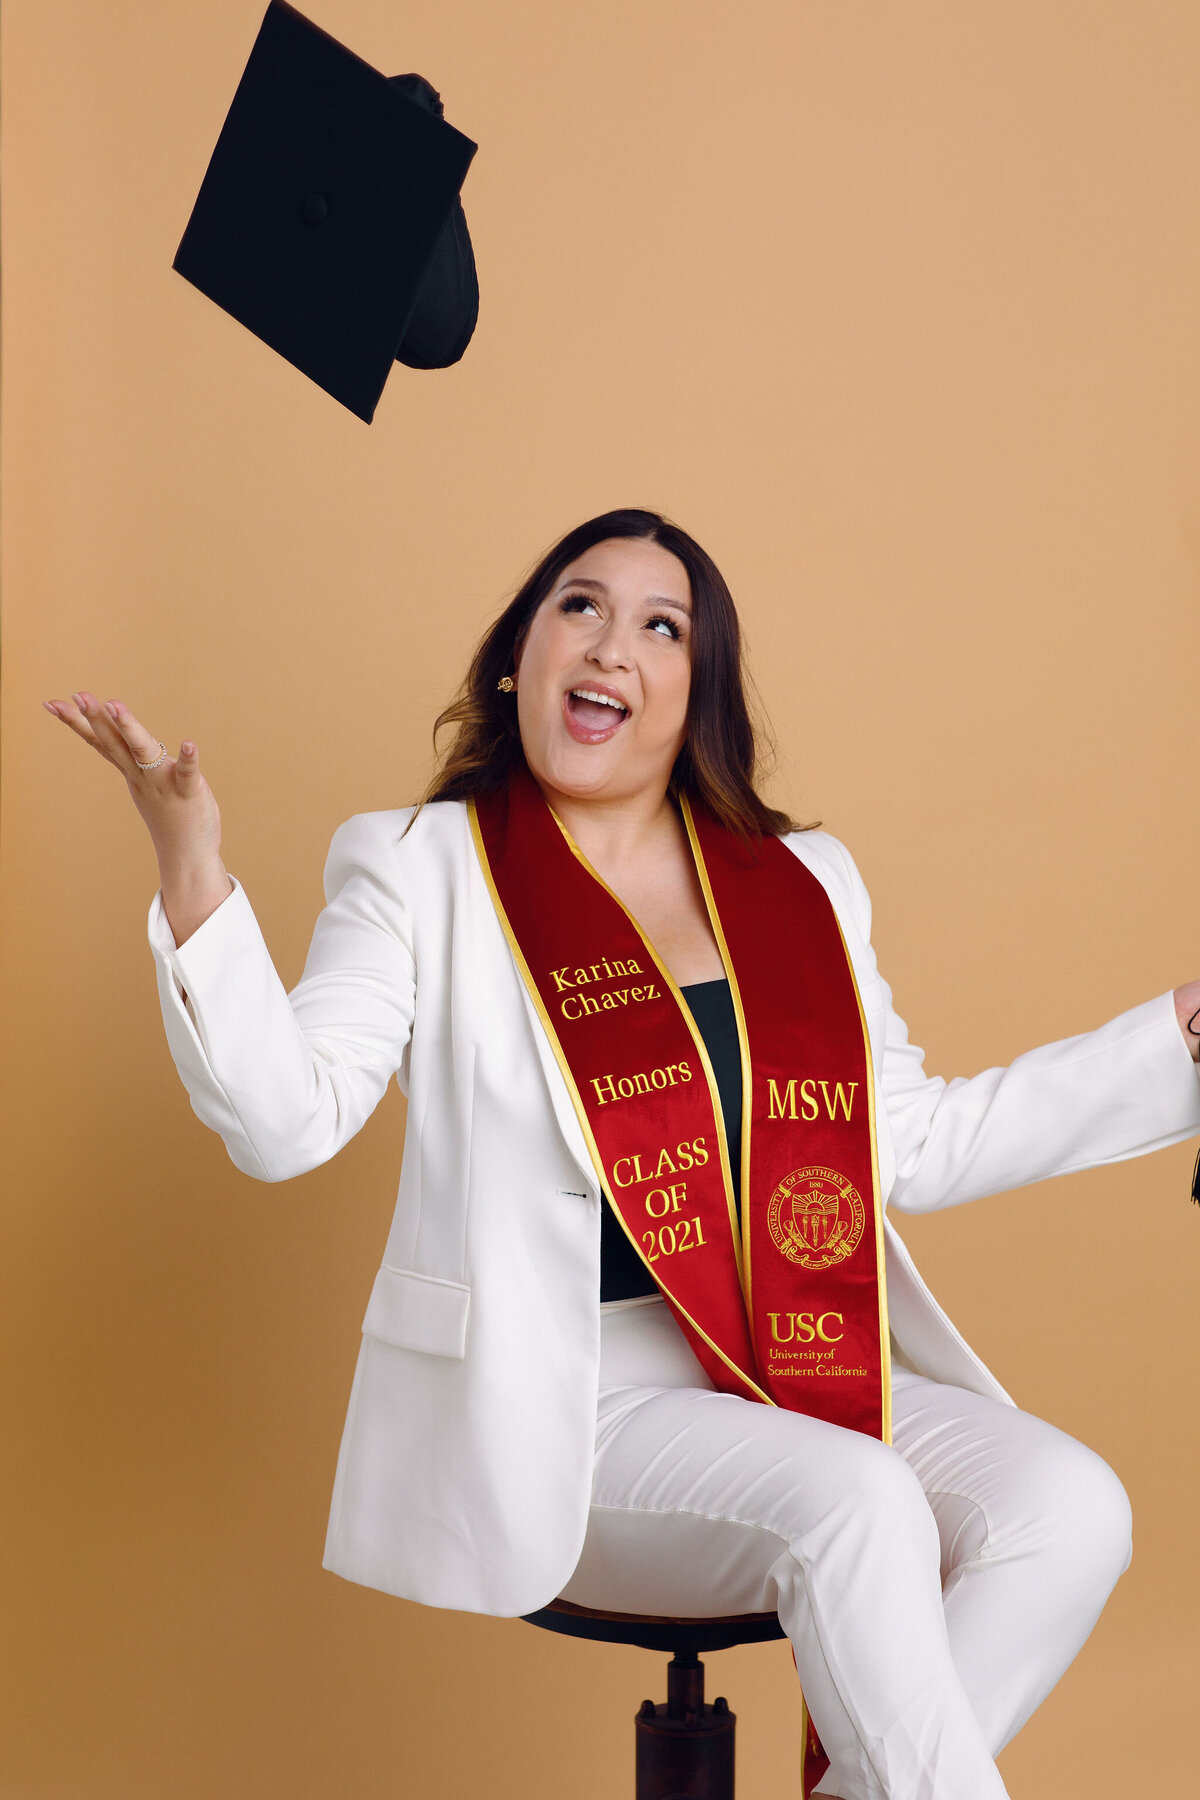 Graduation Portrait Of Young Woman In White Suit Los Angeles